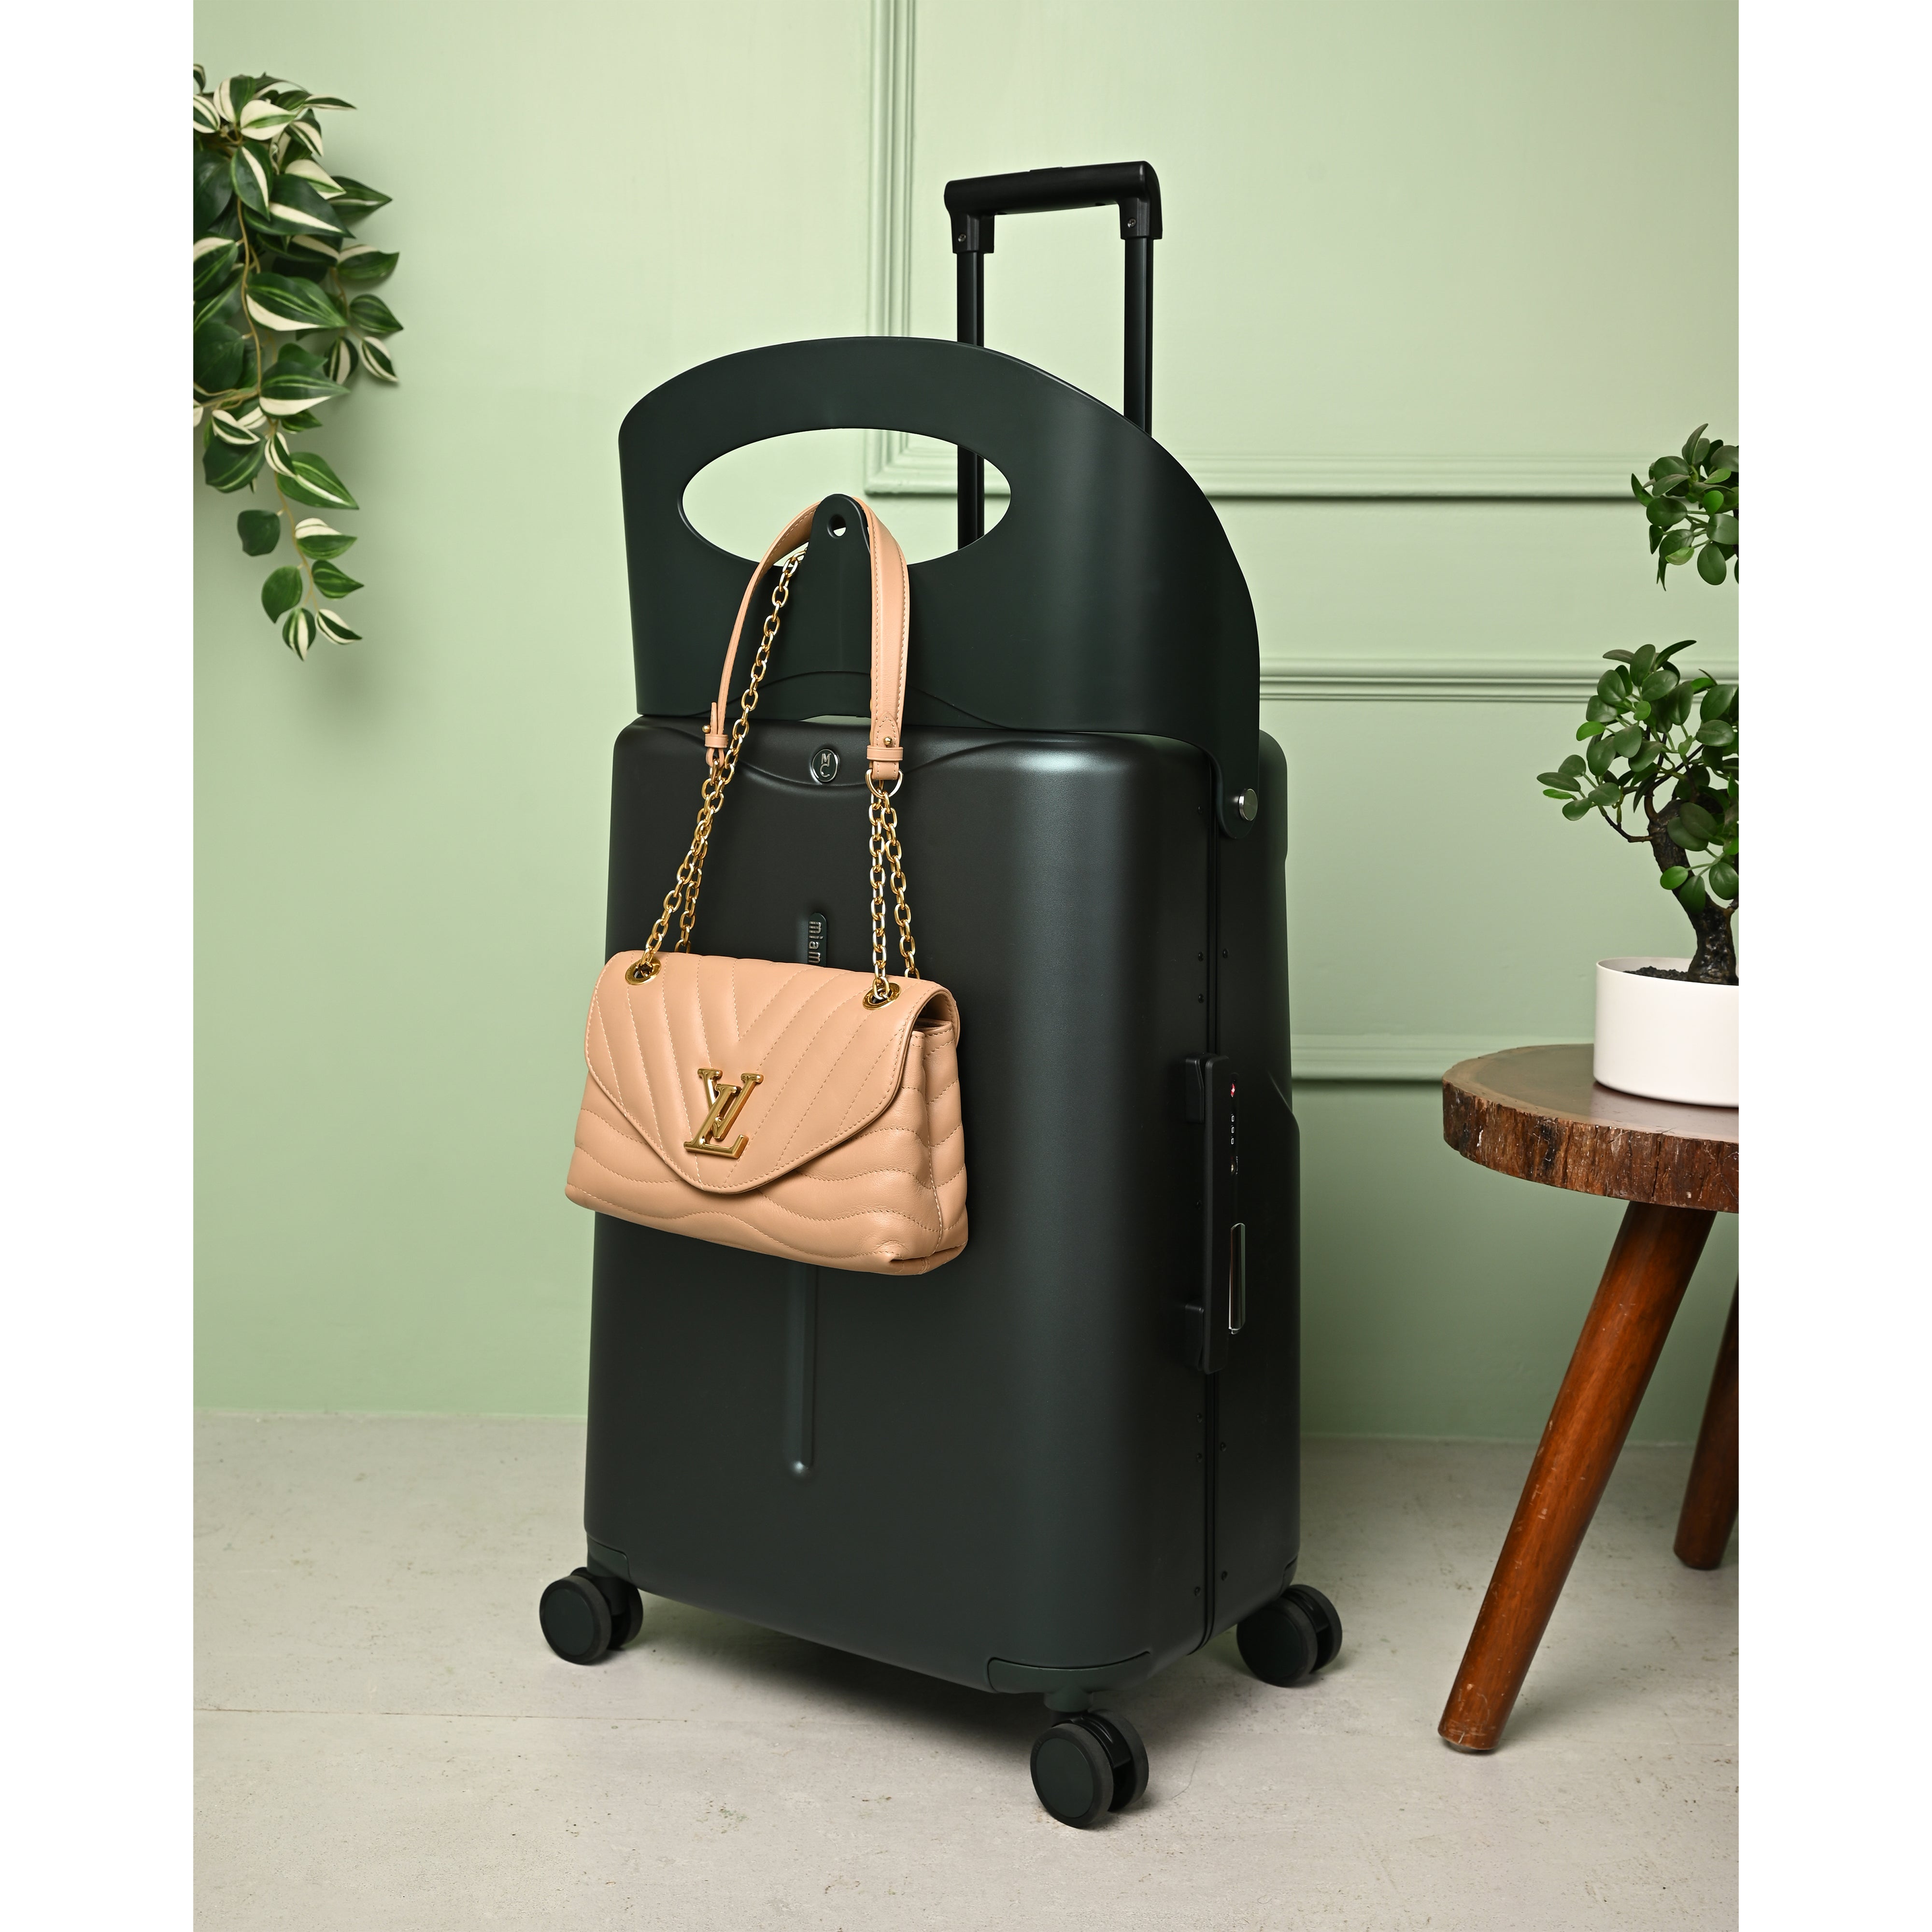 Miamily Forest Green Ride On Trolley Check-In Luggage 24 inches